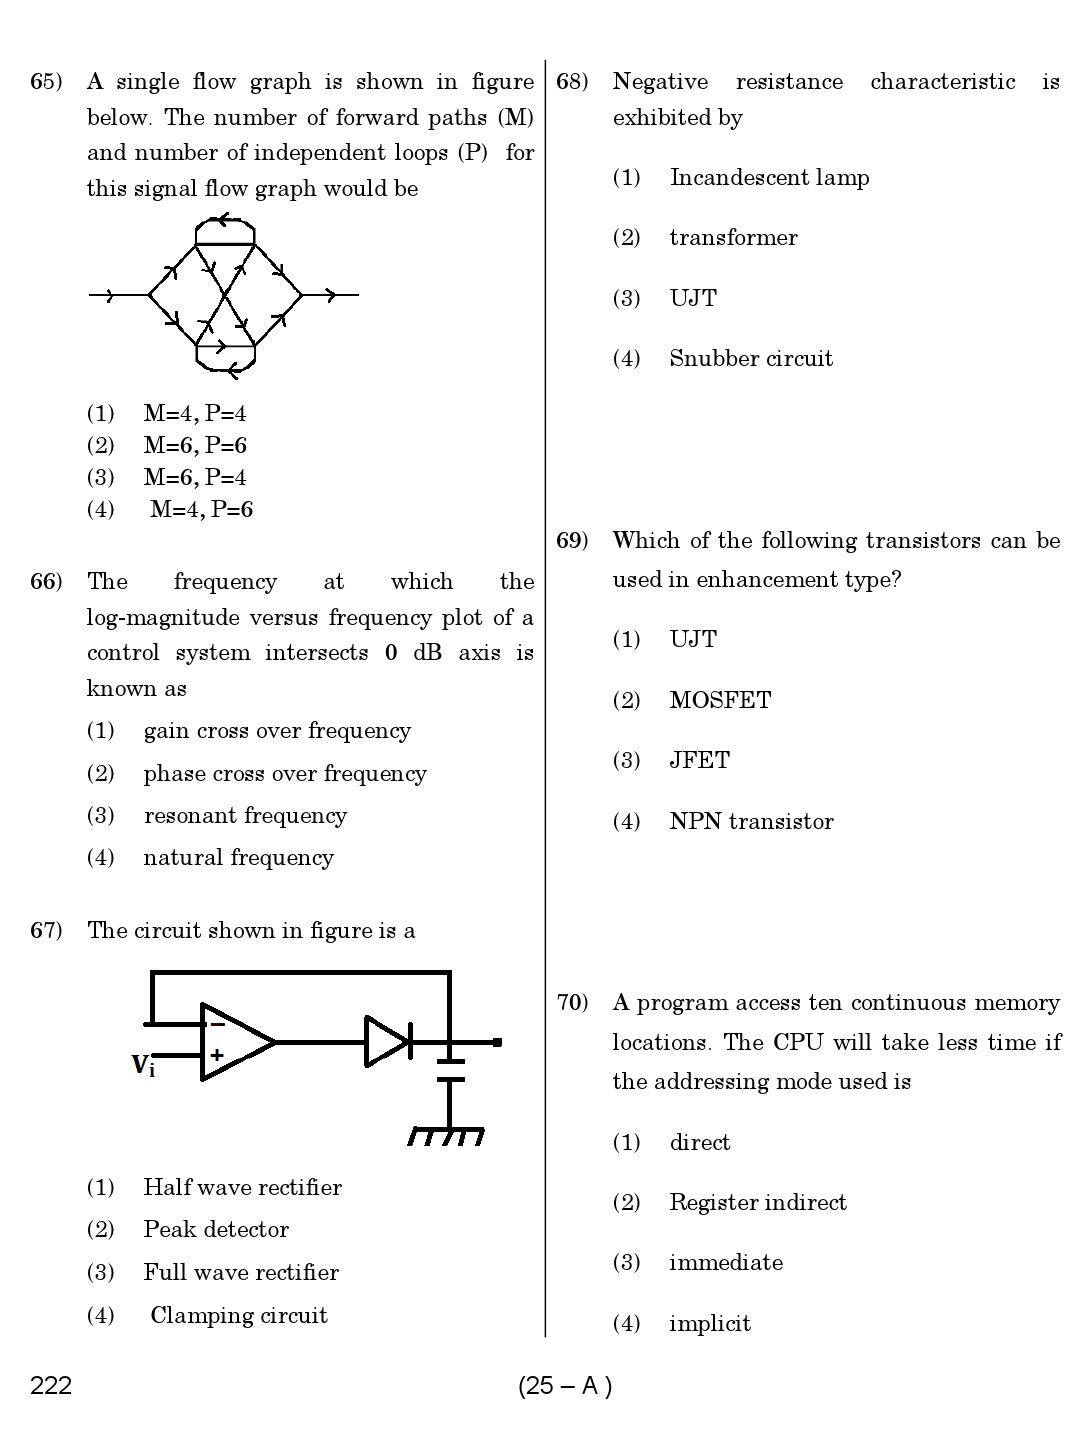 Karnataka PSC Assistant Engineer Electrical Exam Sample Question Paper 25